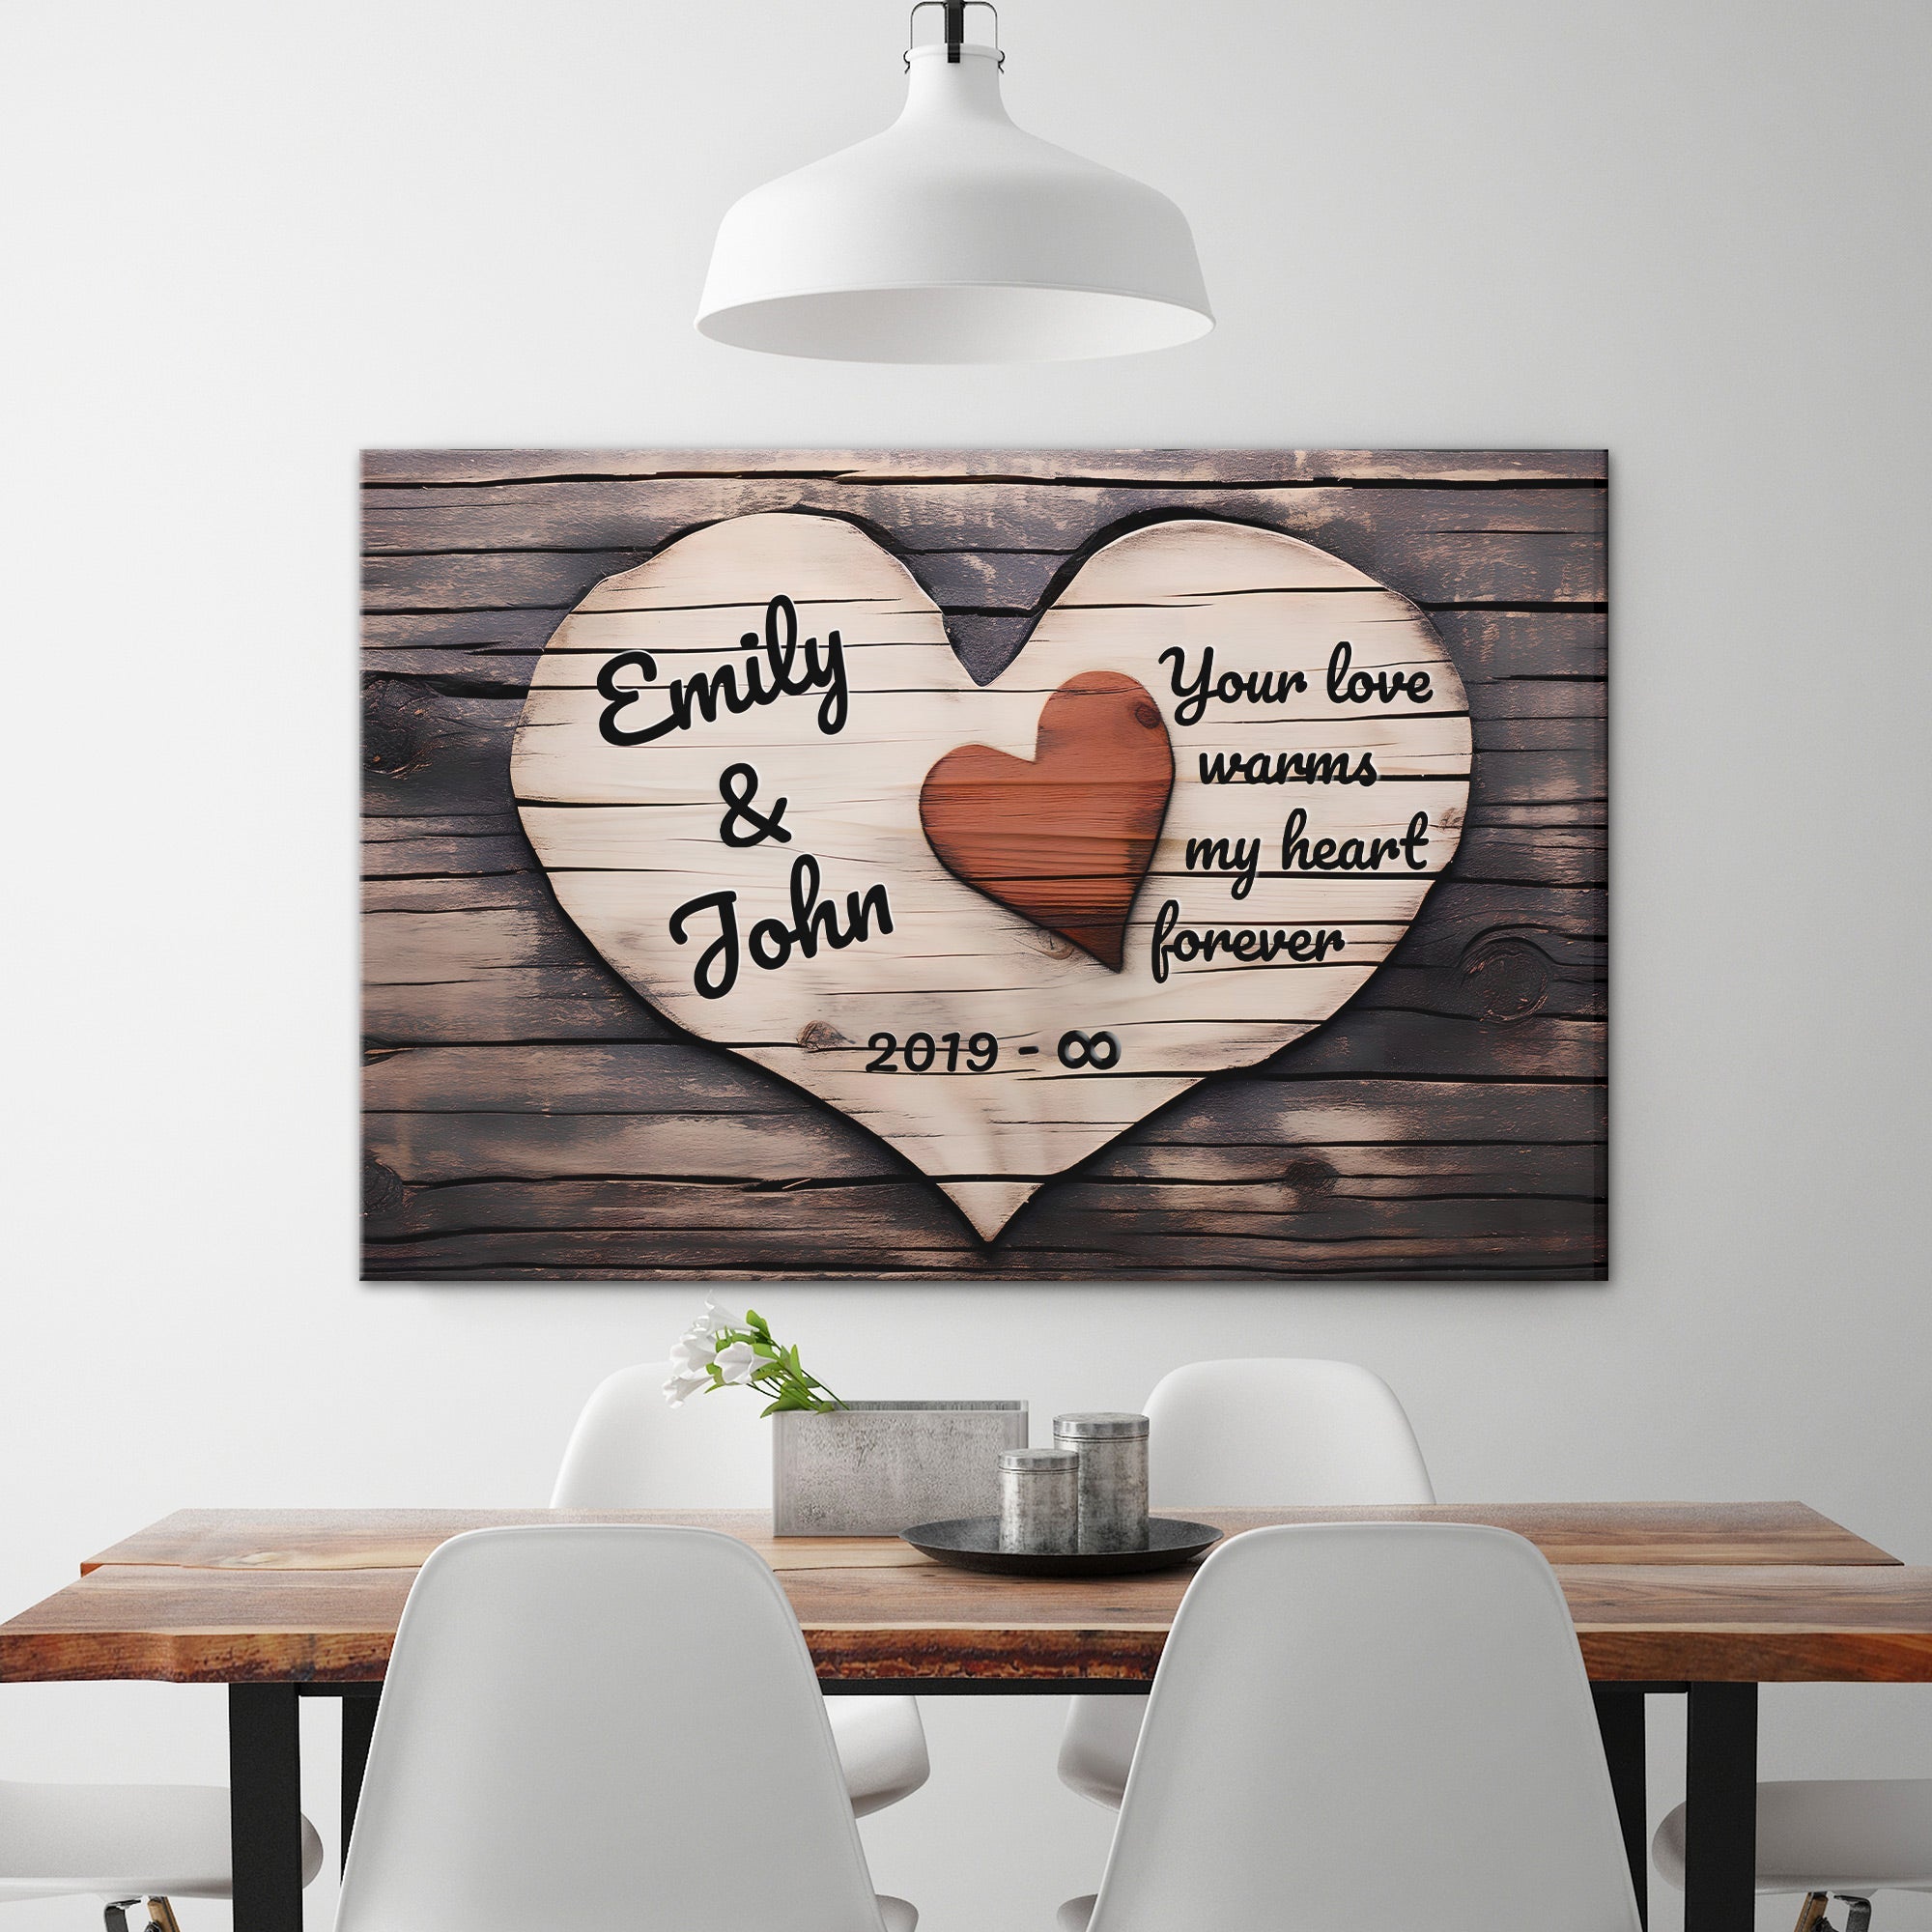 Personalized "Your love warms my heart forever" Premium Canvas